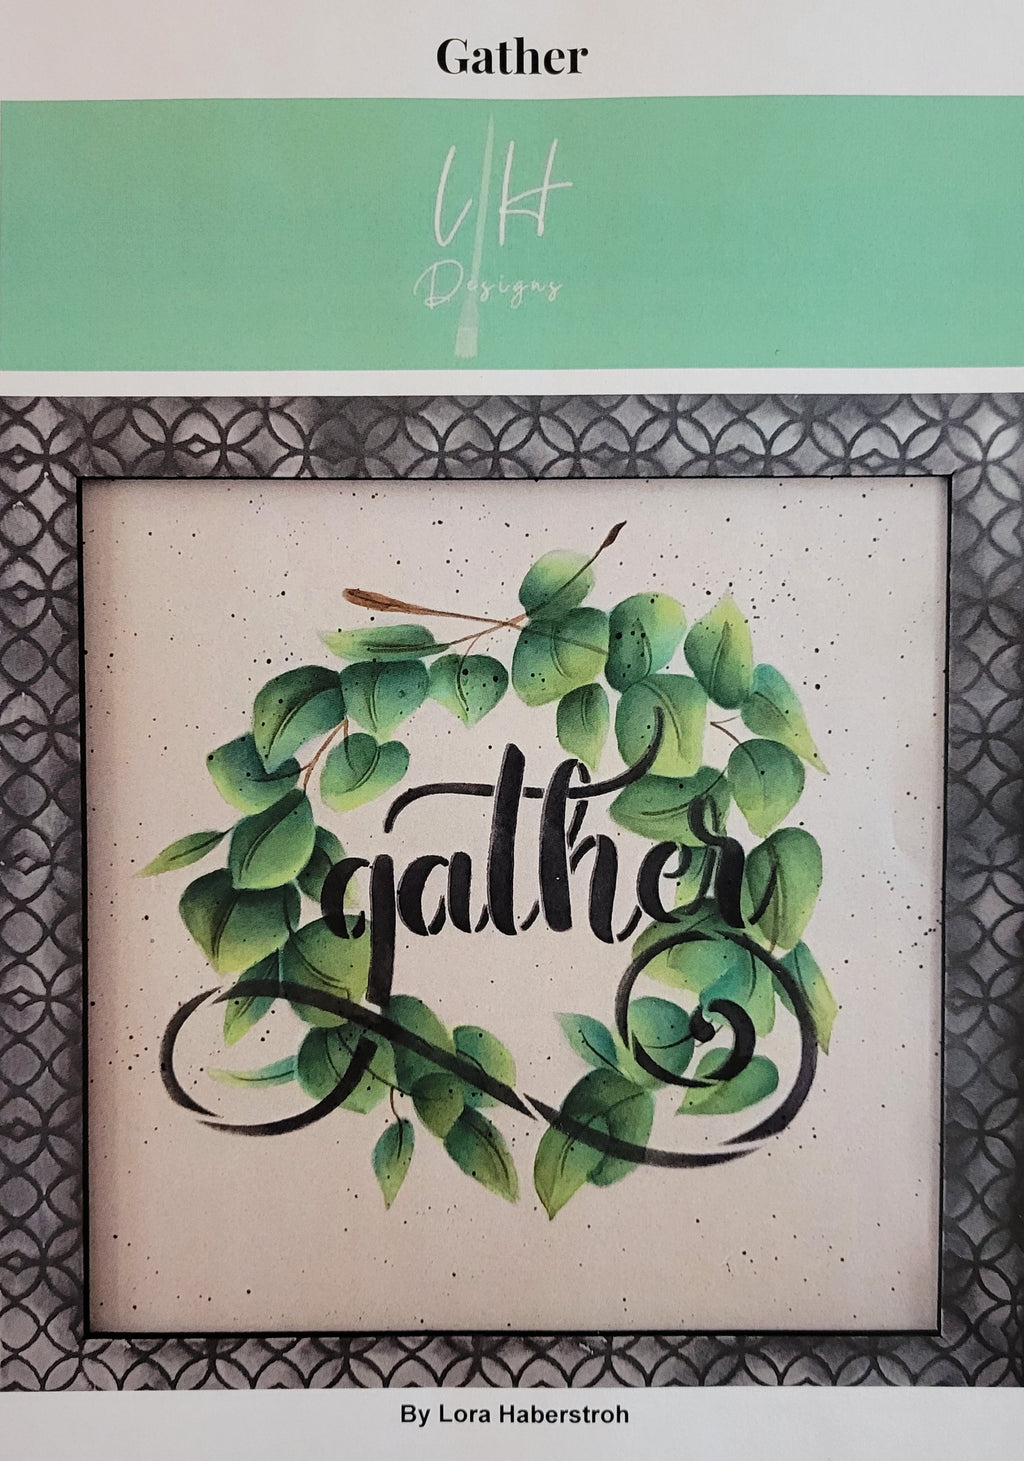 Gather packet by Lora Haberstroh